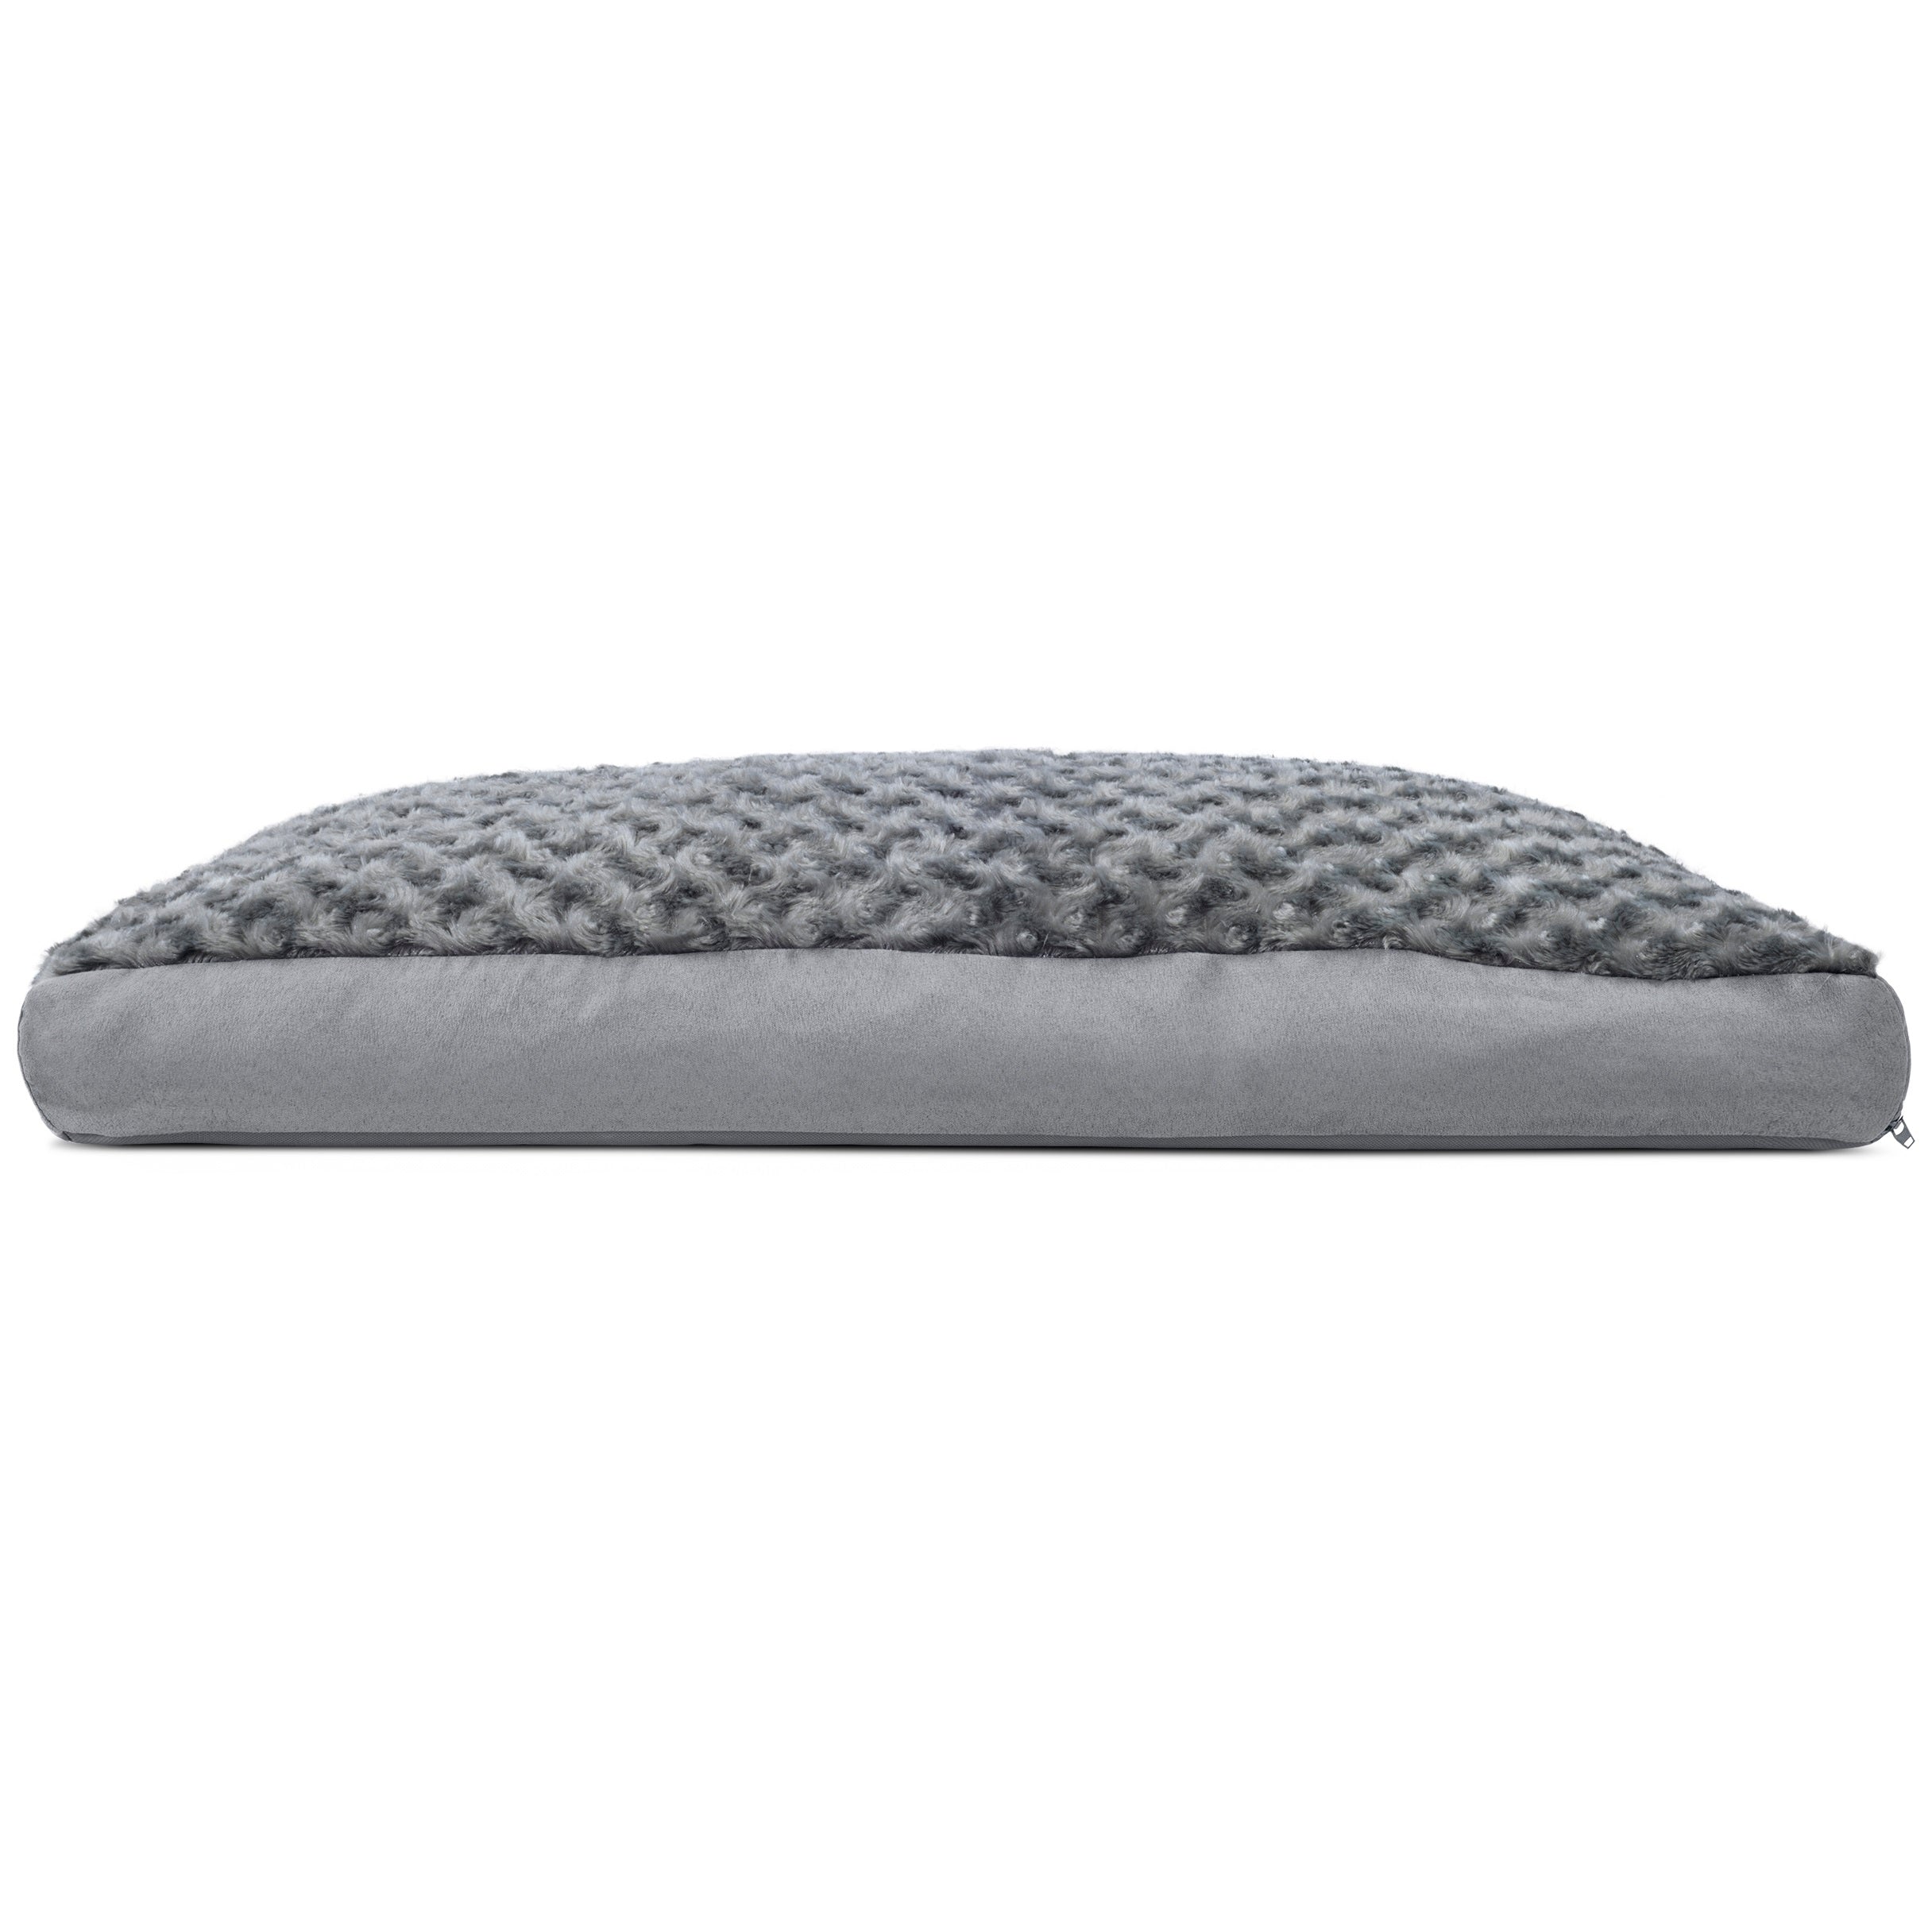 FurHaven Pet Products | Deluxe Plush Pillow Pet Bed for Dogs and Cats， Gray， Medium